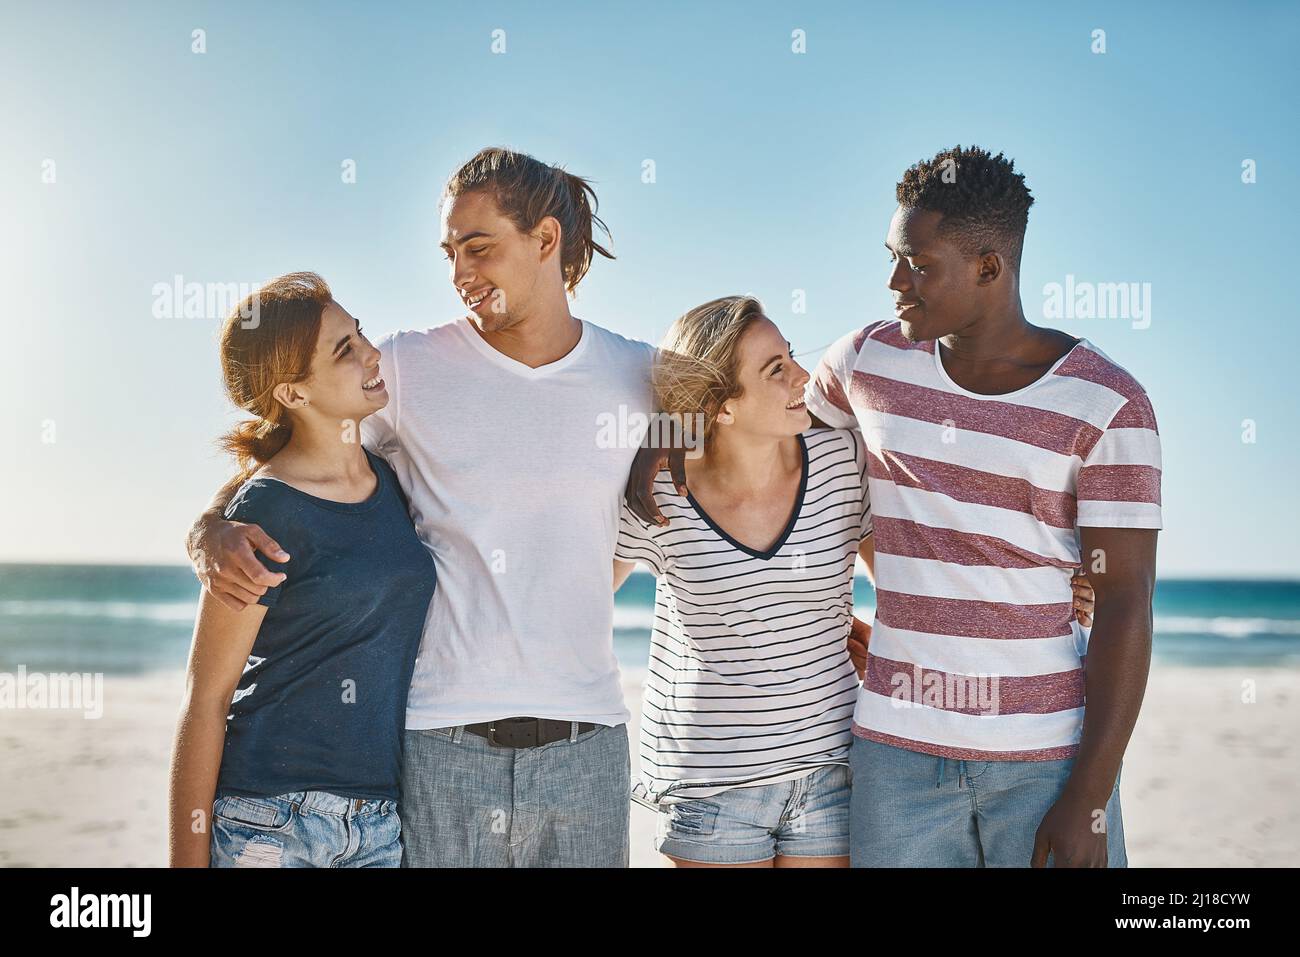 Can we make every day a beach day. Shot of a group of happy young friends posing on the beach together. Stock Photo